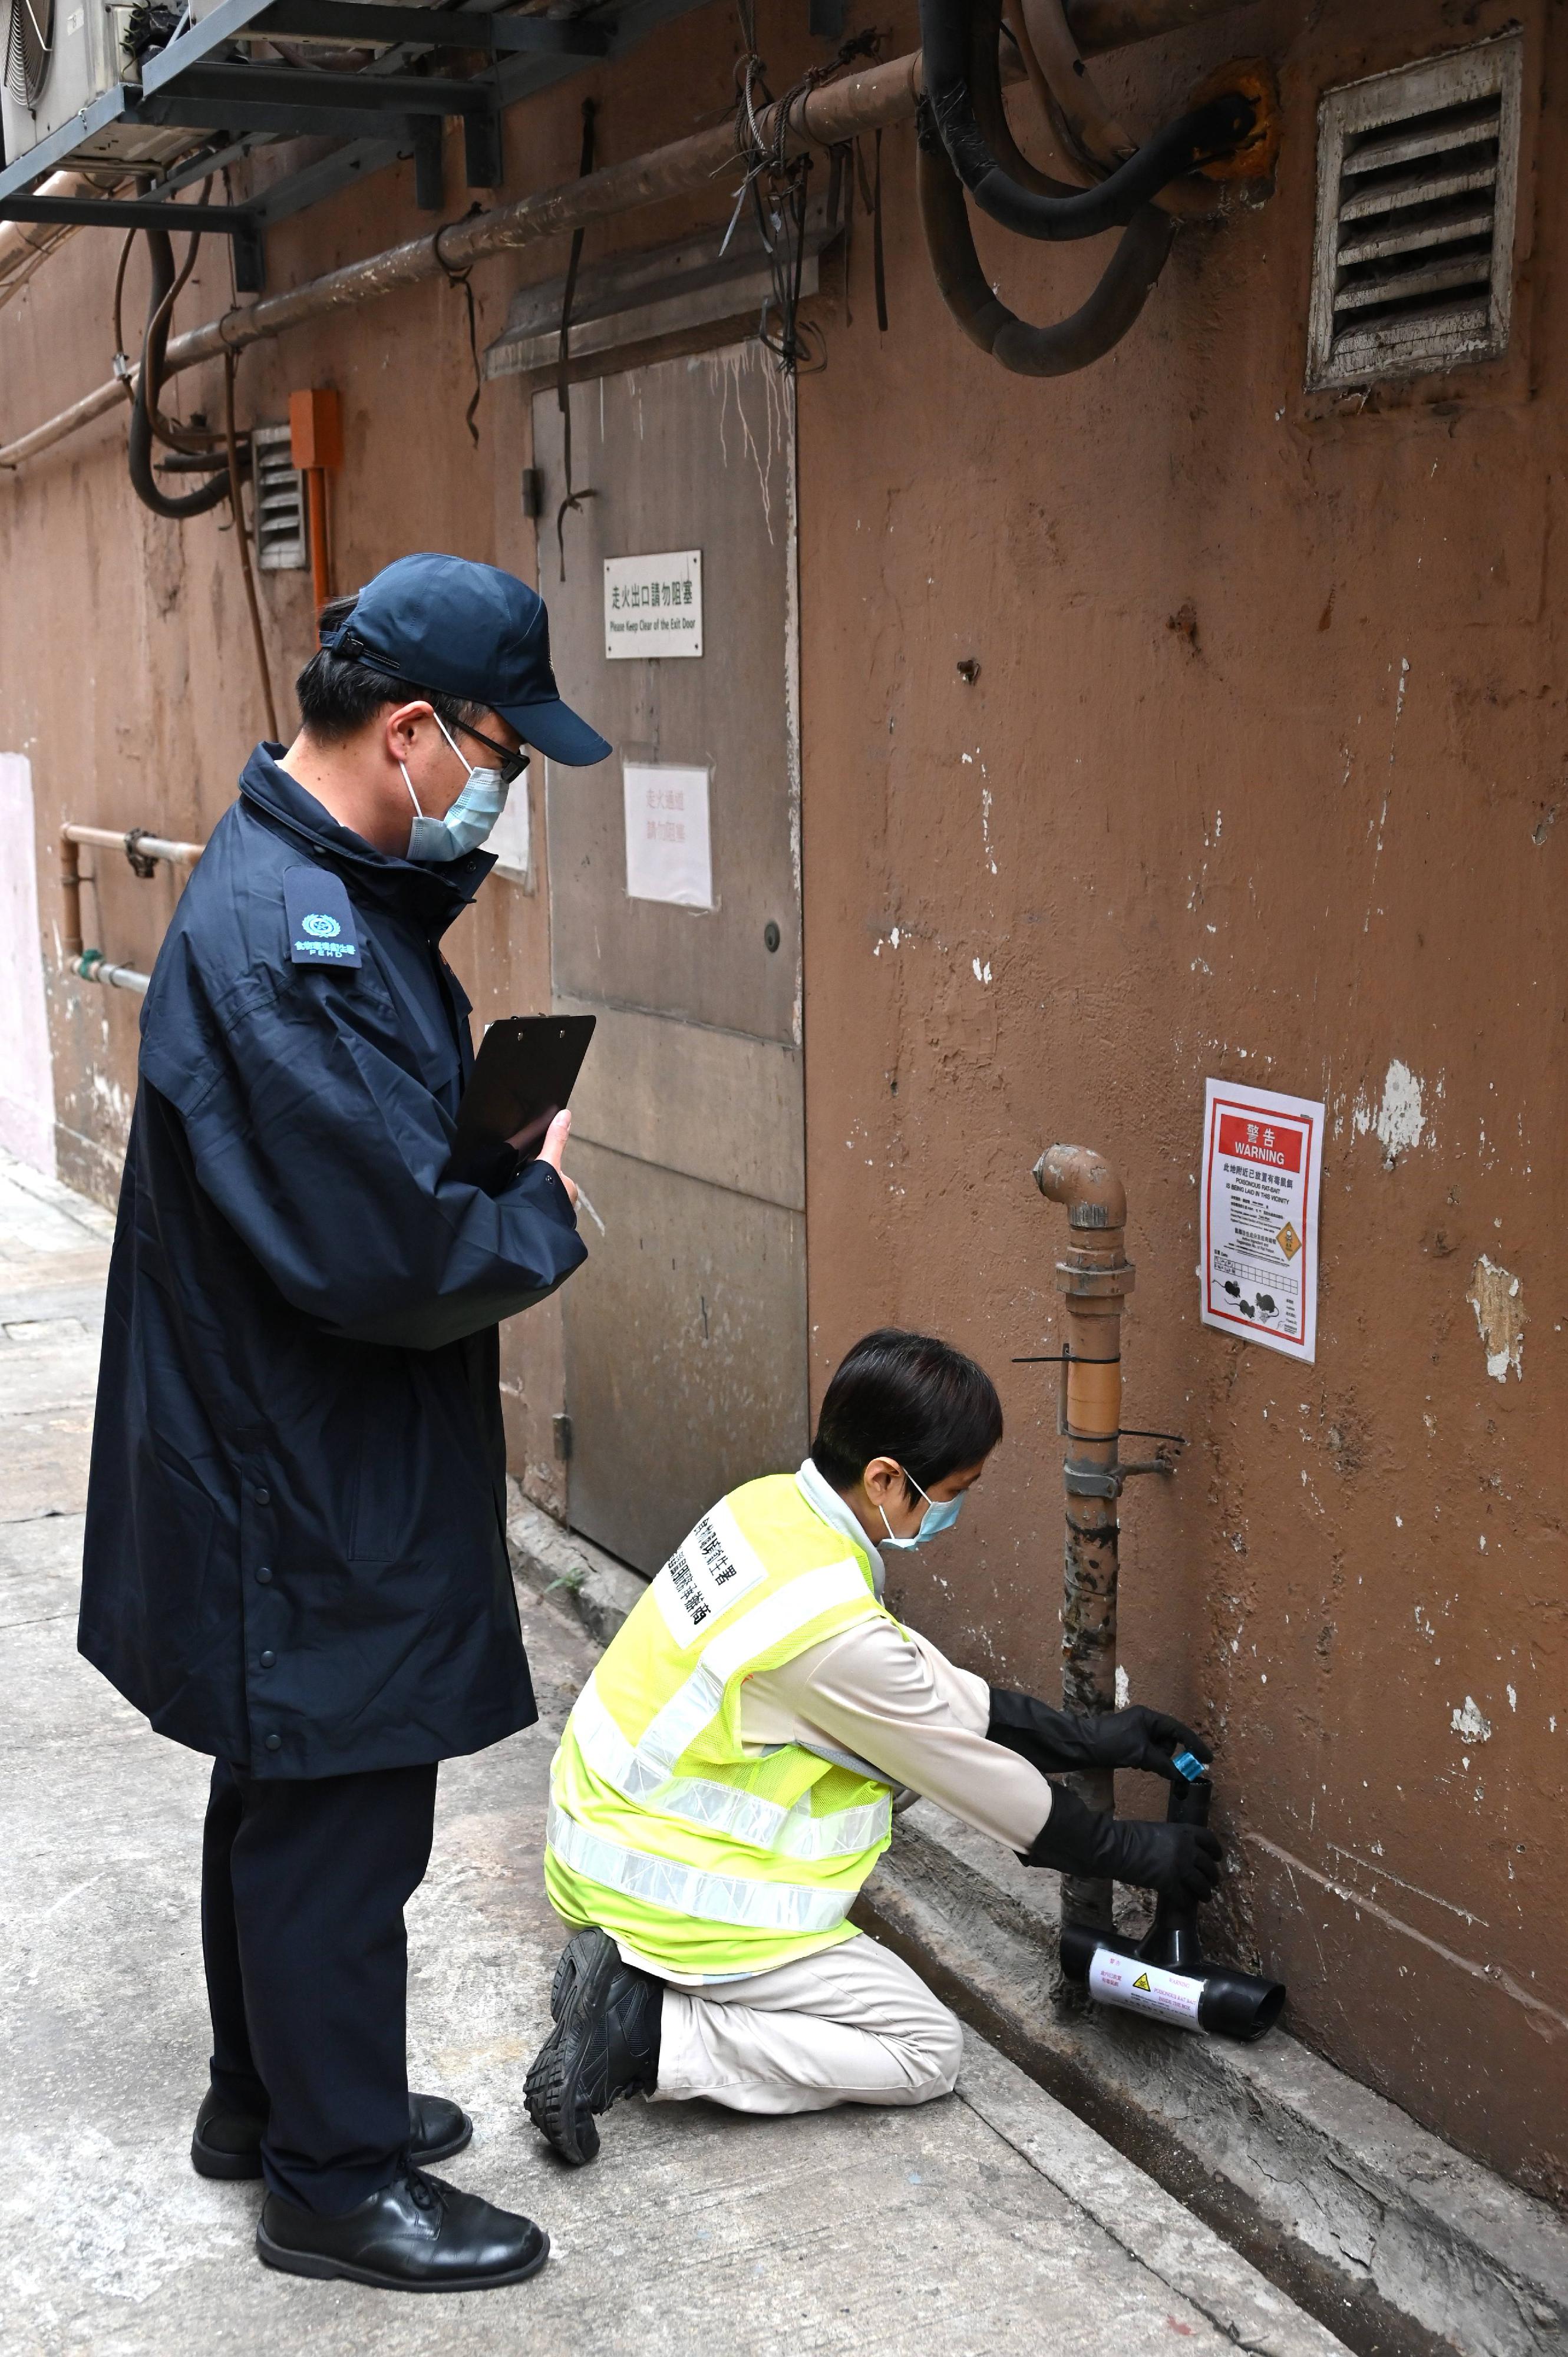 A spokesman for the Food and Environmental Hygiene Department (FEHD) today (January 27) appealed to members of the public to maintain cleanliness in the household, the community and public places during the year end and the Lunar New Year holidays. The FEHD is continuously rolling out the territory-wide anti-rodent campaign this year. Photo shows an FEHD officer and a service contractor of the FEHD placing a bait box in a rear lane to strengthen rodent control.